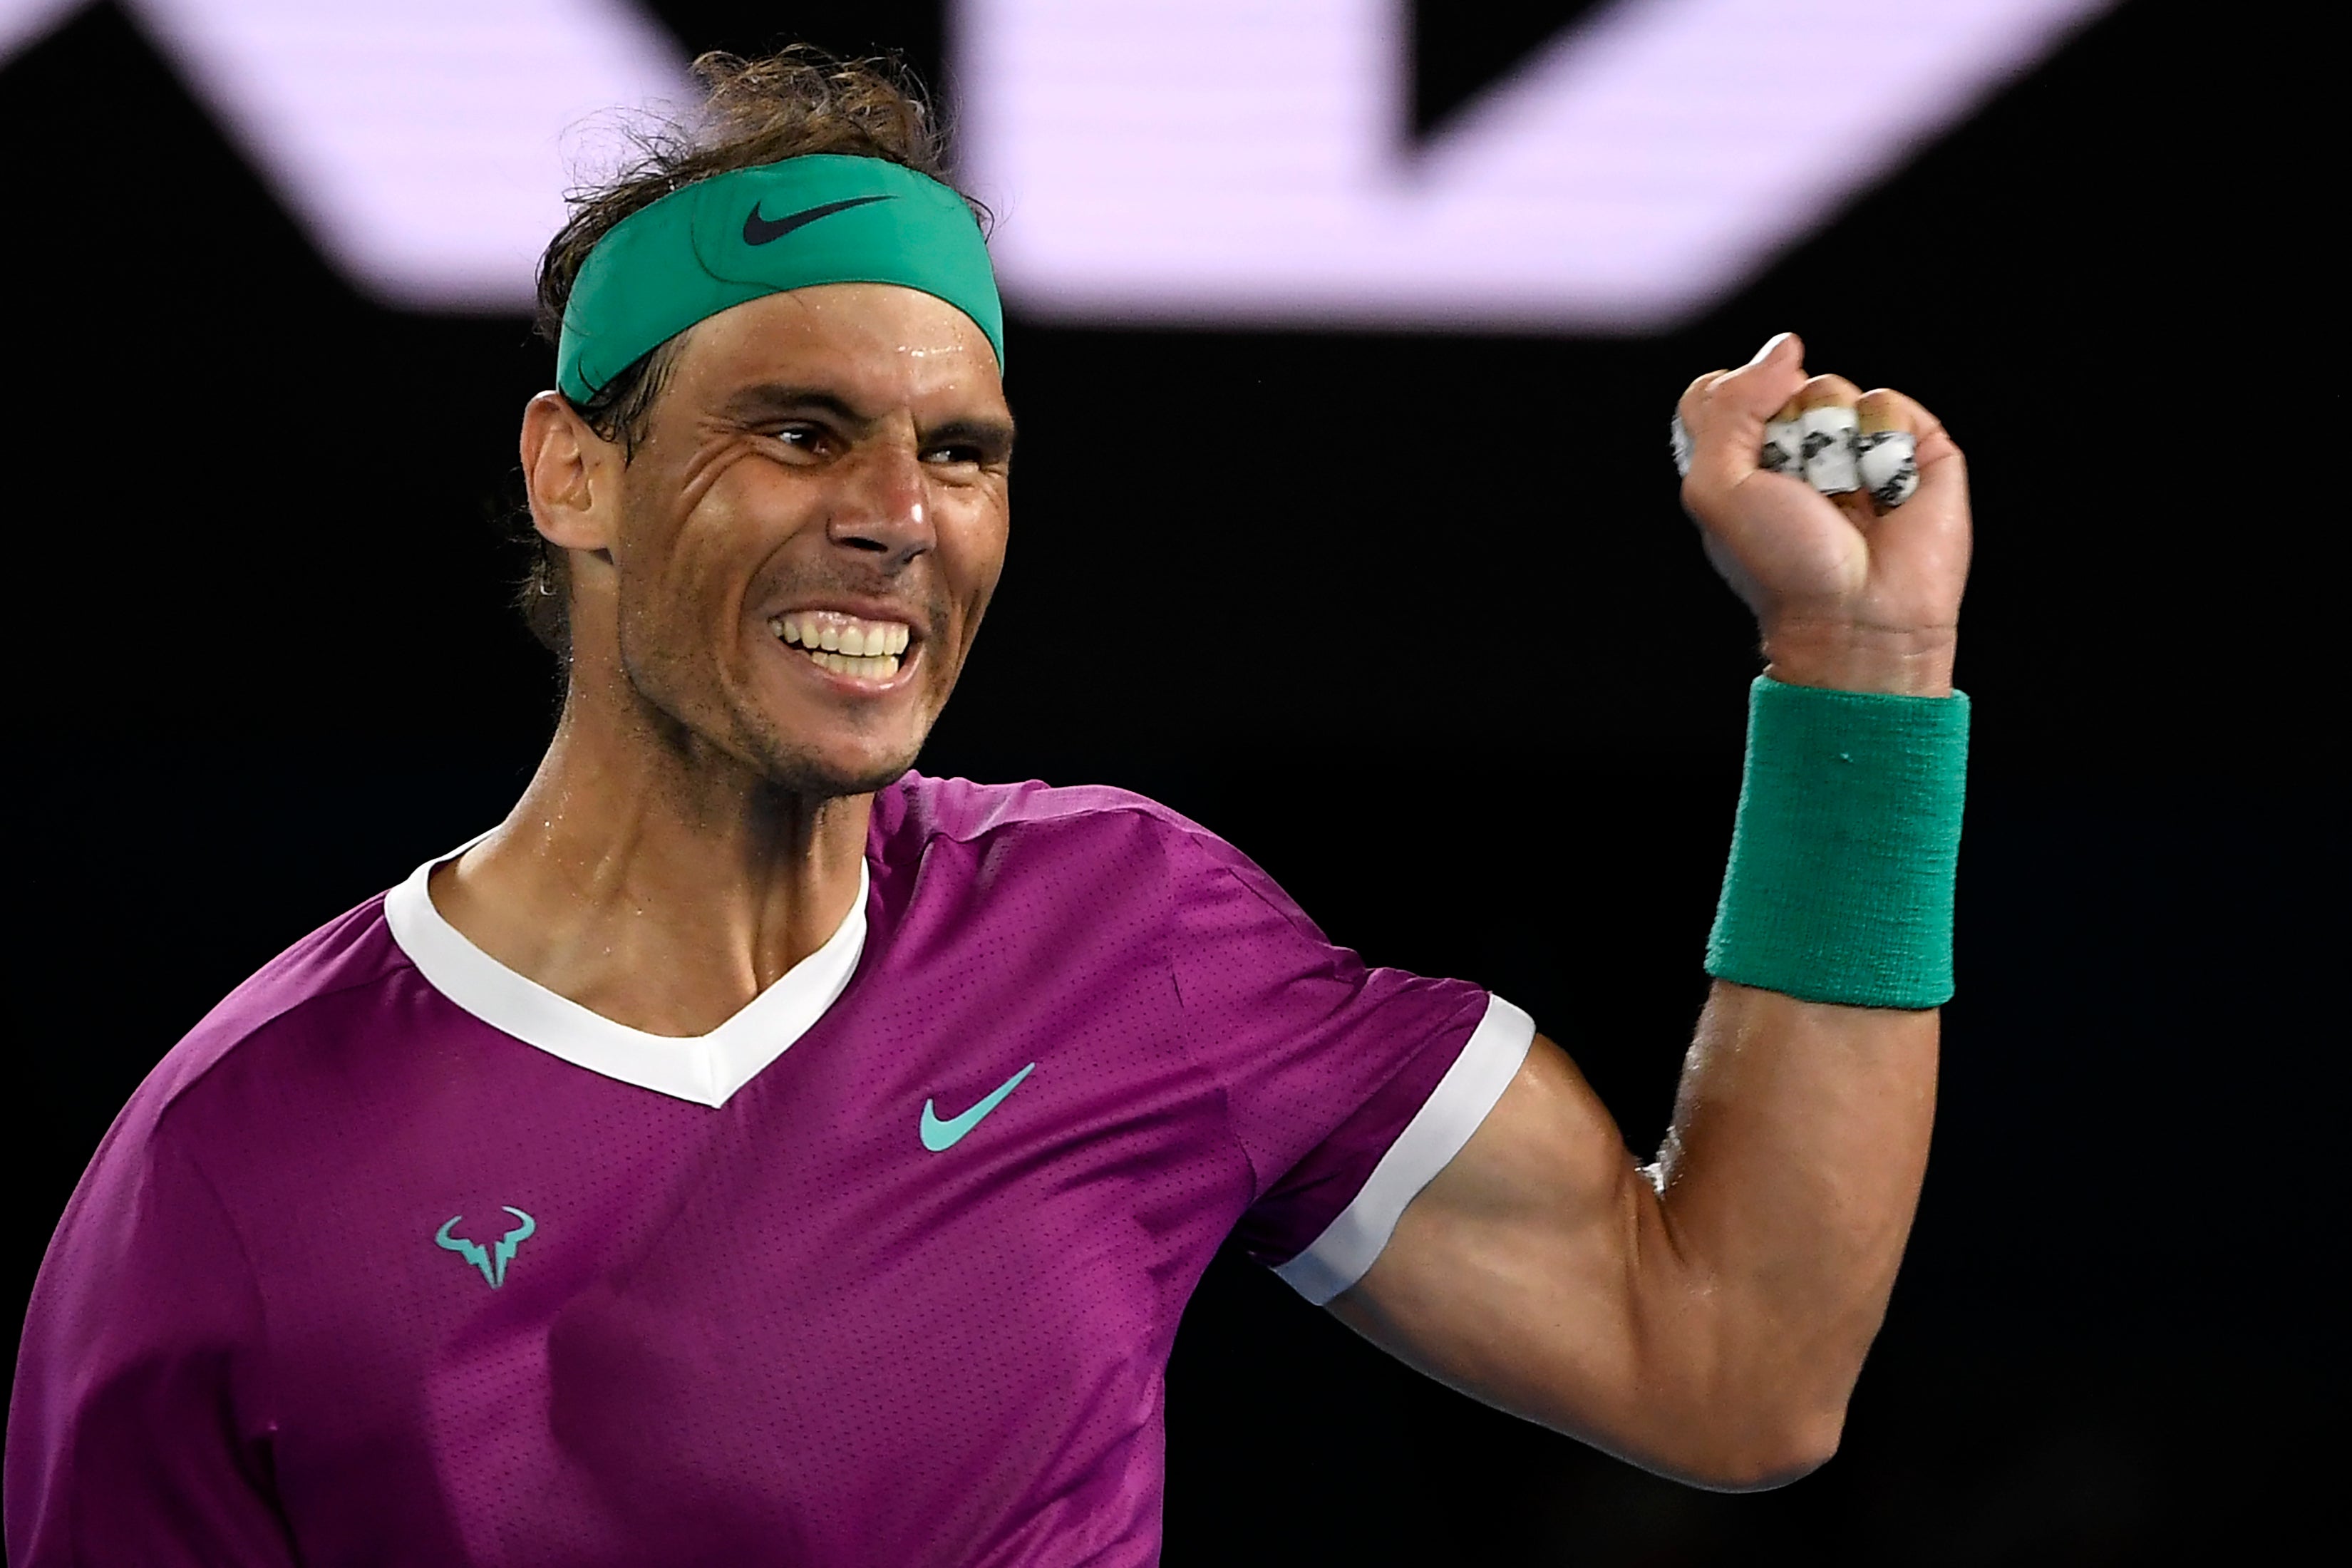 Rafael Nadal withstands Matteo Berrettini fightback to reach Australian Open final The Independent